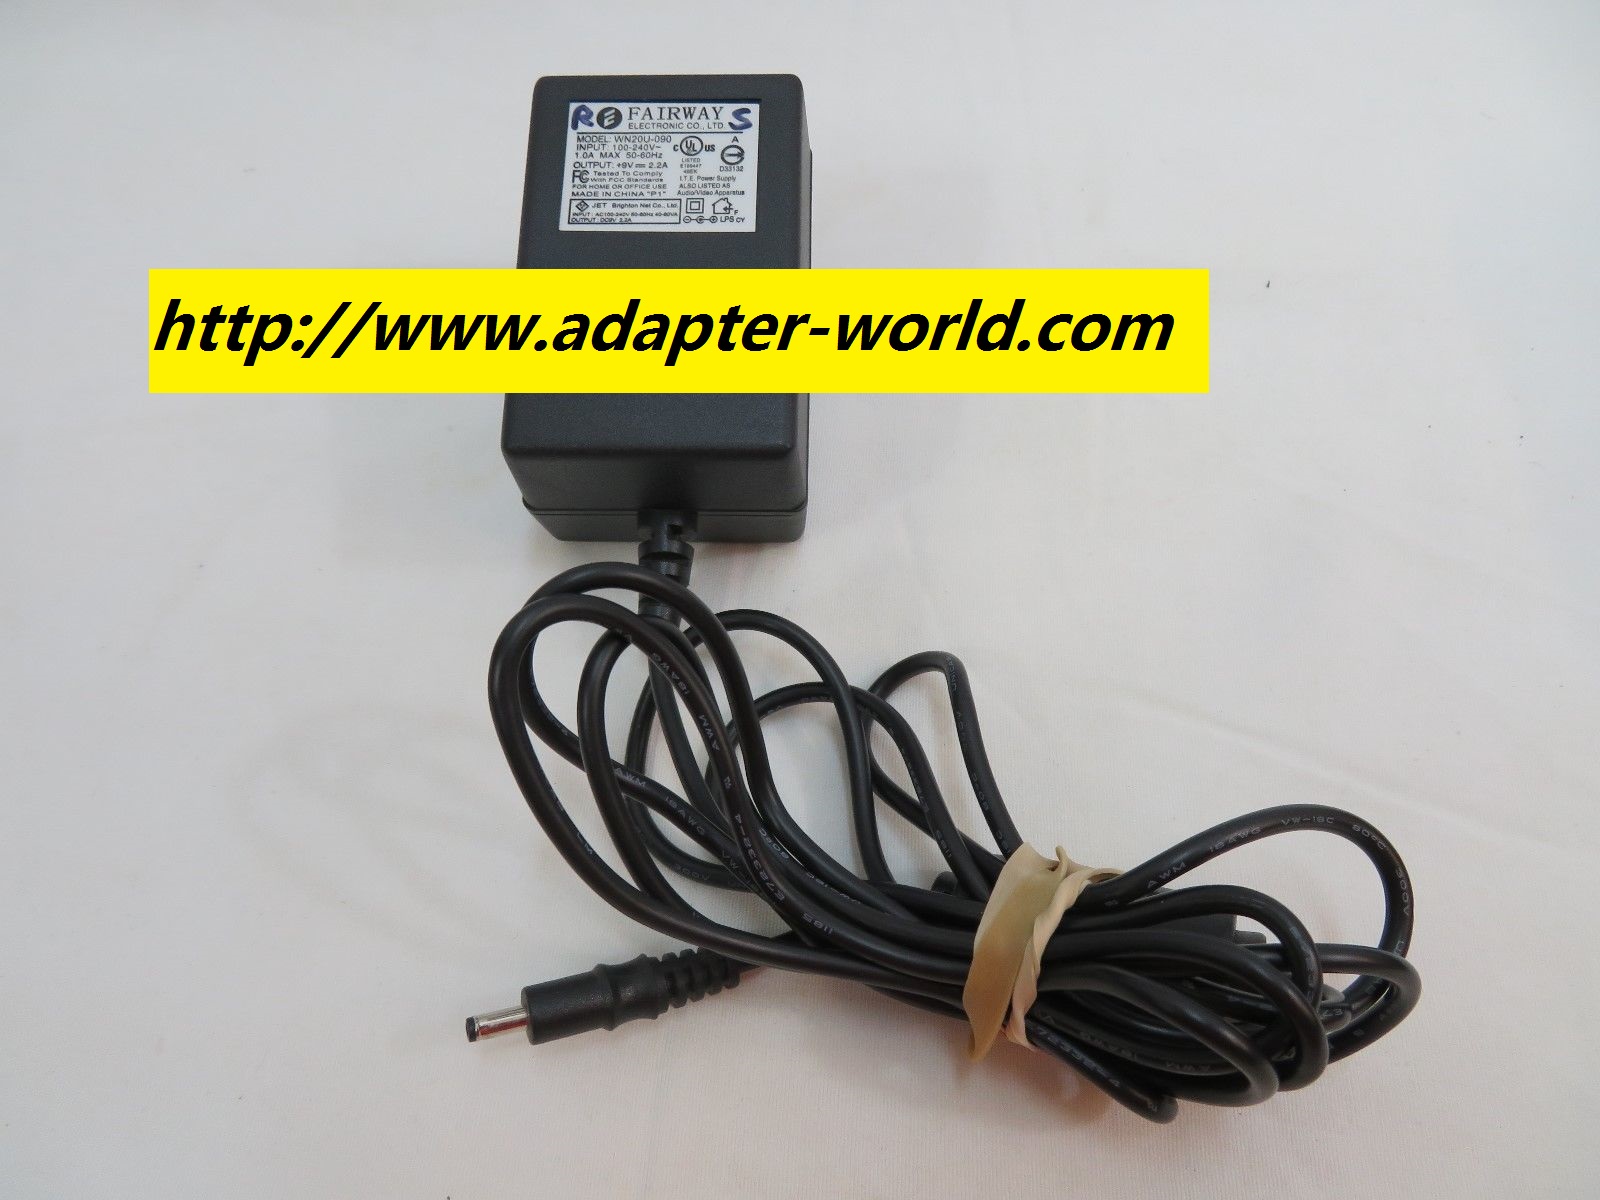 *100% Brand NEW* Fairway Electronics Output 9V 2.2A WN20U-090 AC Power Supply Adapter Free Shipping! - Click Image to Close